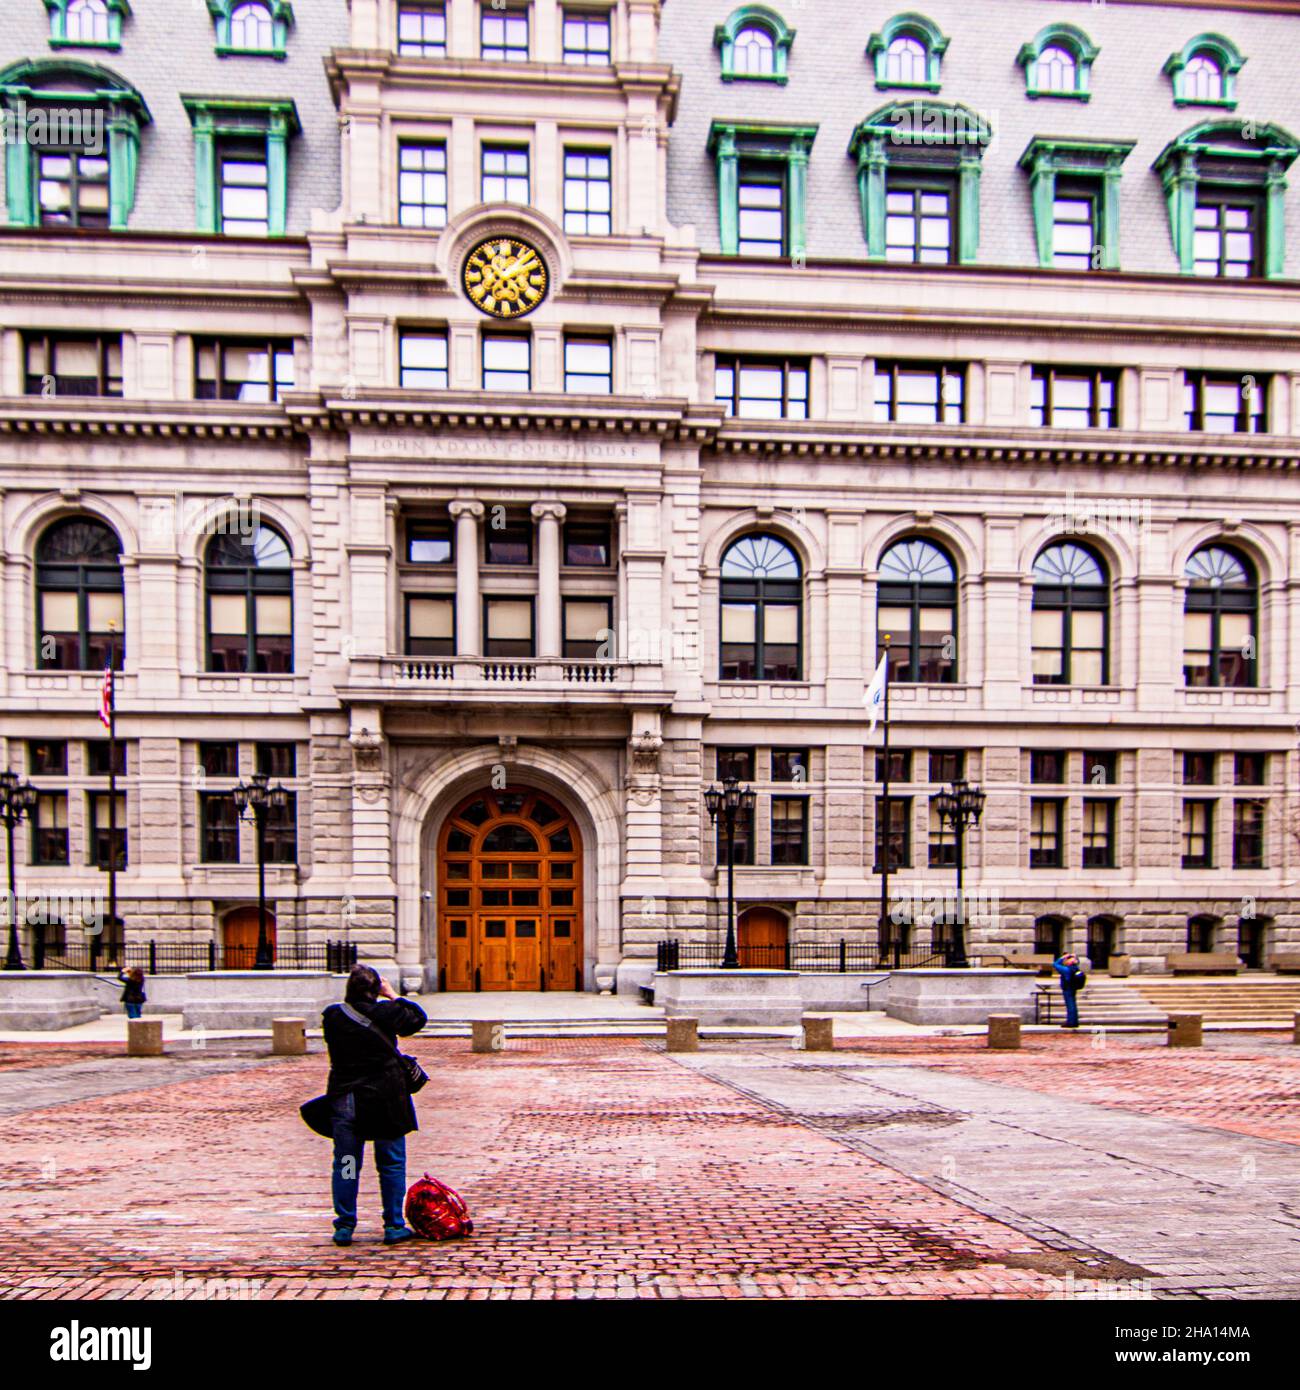 A photographer takes a photo of the John Adams Courthouse in Boston, MA Stock Photo